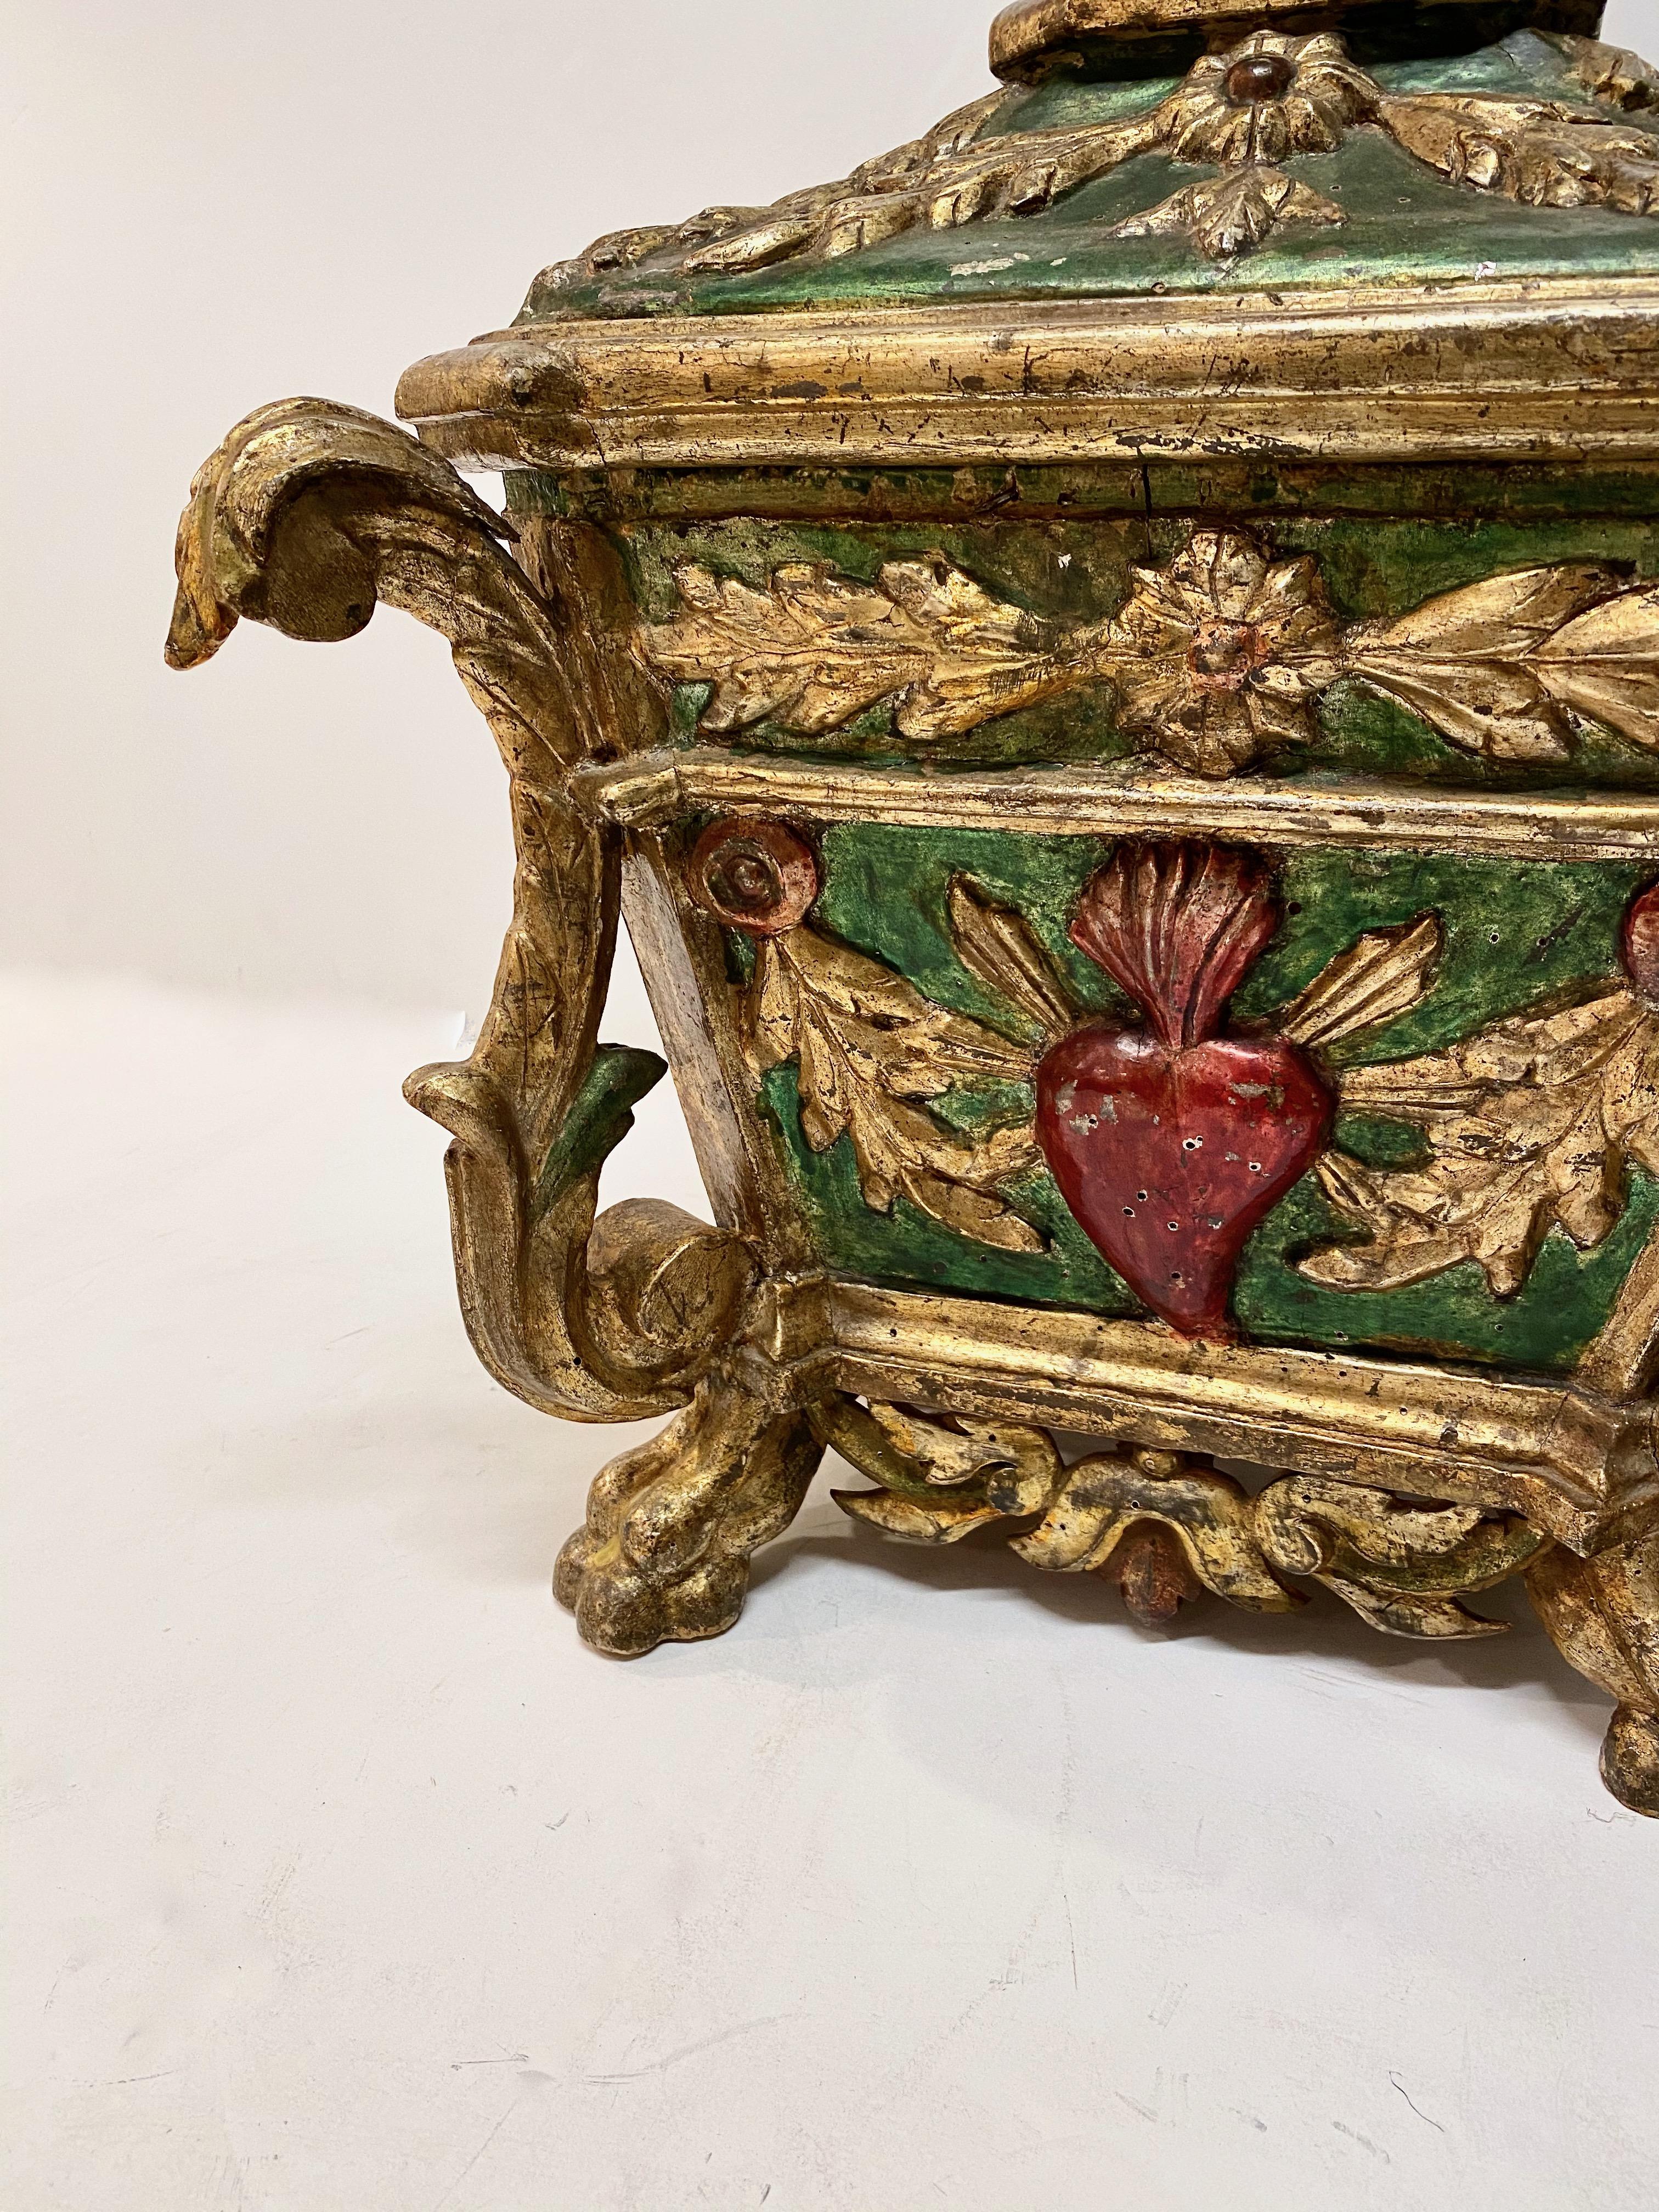 This is an outstanding example of a late 18th/early 19th century Spanish Colonial Reliquary or table box. The emerald green combined with the gold leaf decoration makes this gorgeous box even more eye-catching. The reliquary is in overall very good